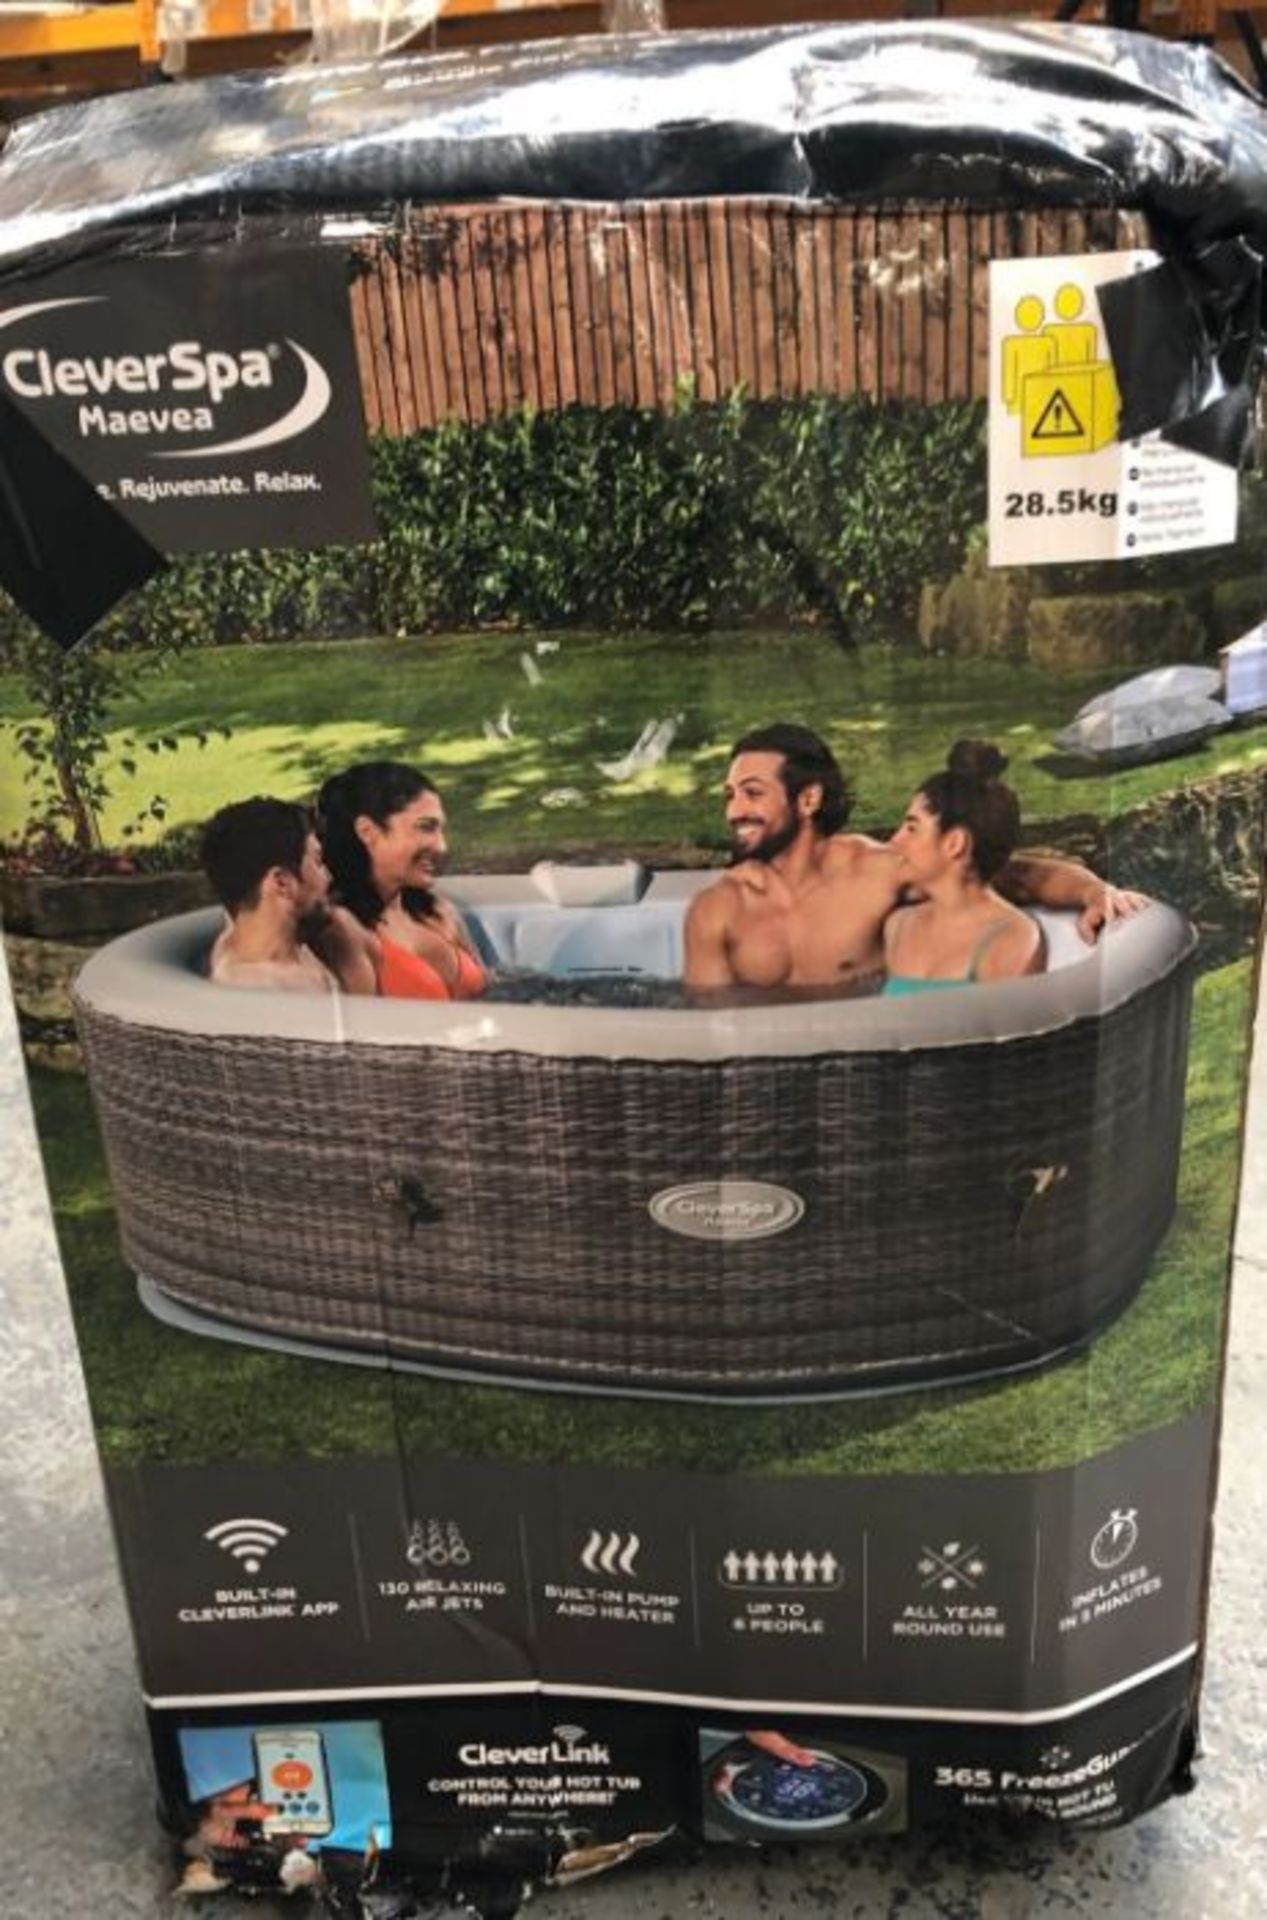 1 x CLEVERSPA MAEVE 6 PERSON HOT TUB - RRP £524.12